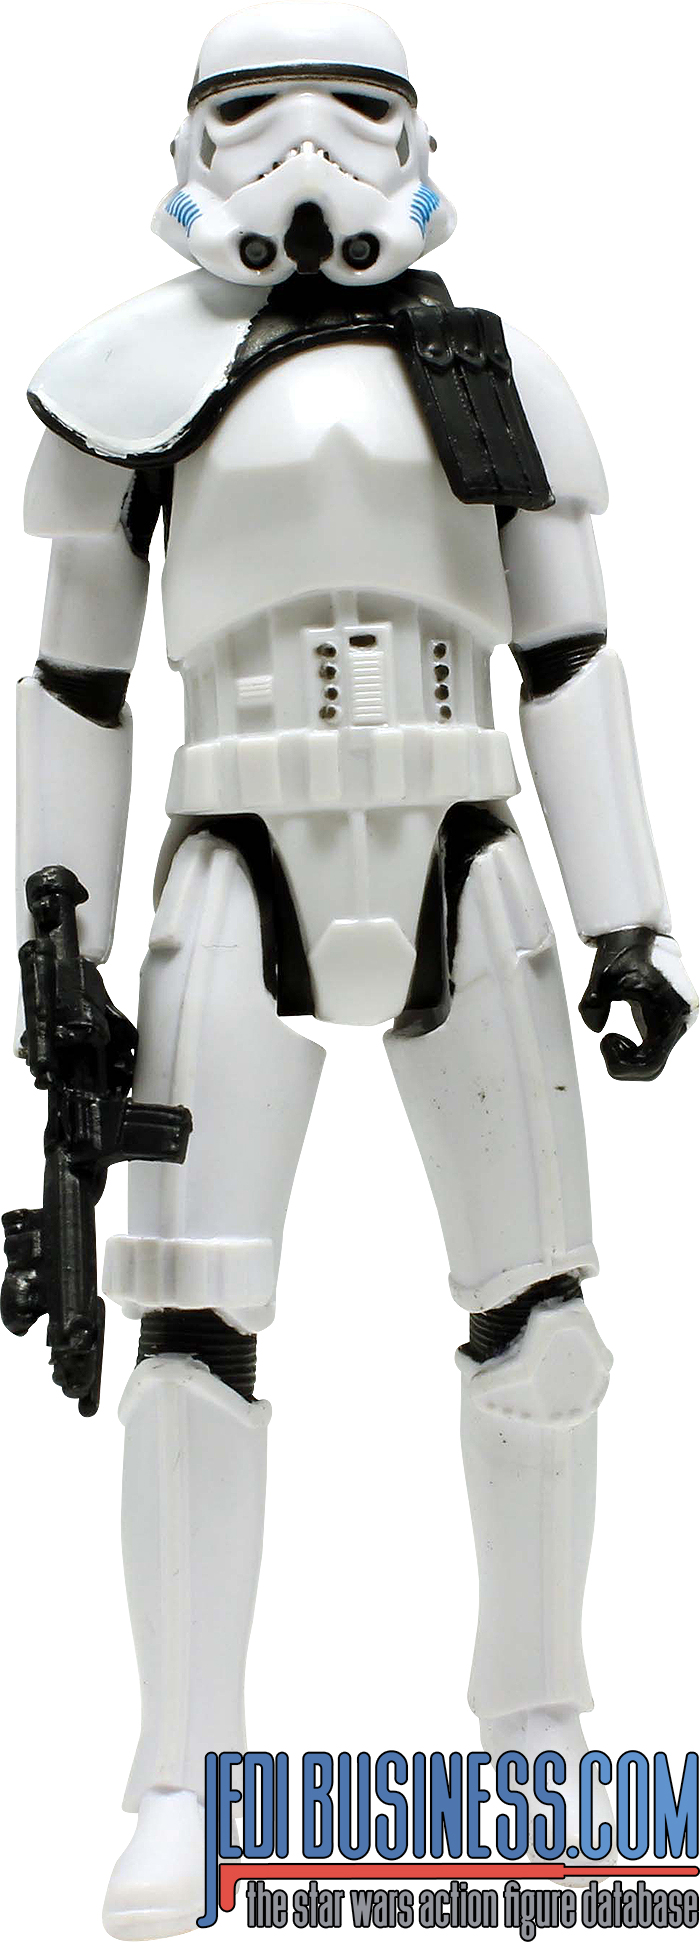 Stormtrooper Kohl's Rogue One 4-Pack